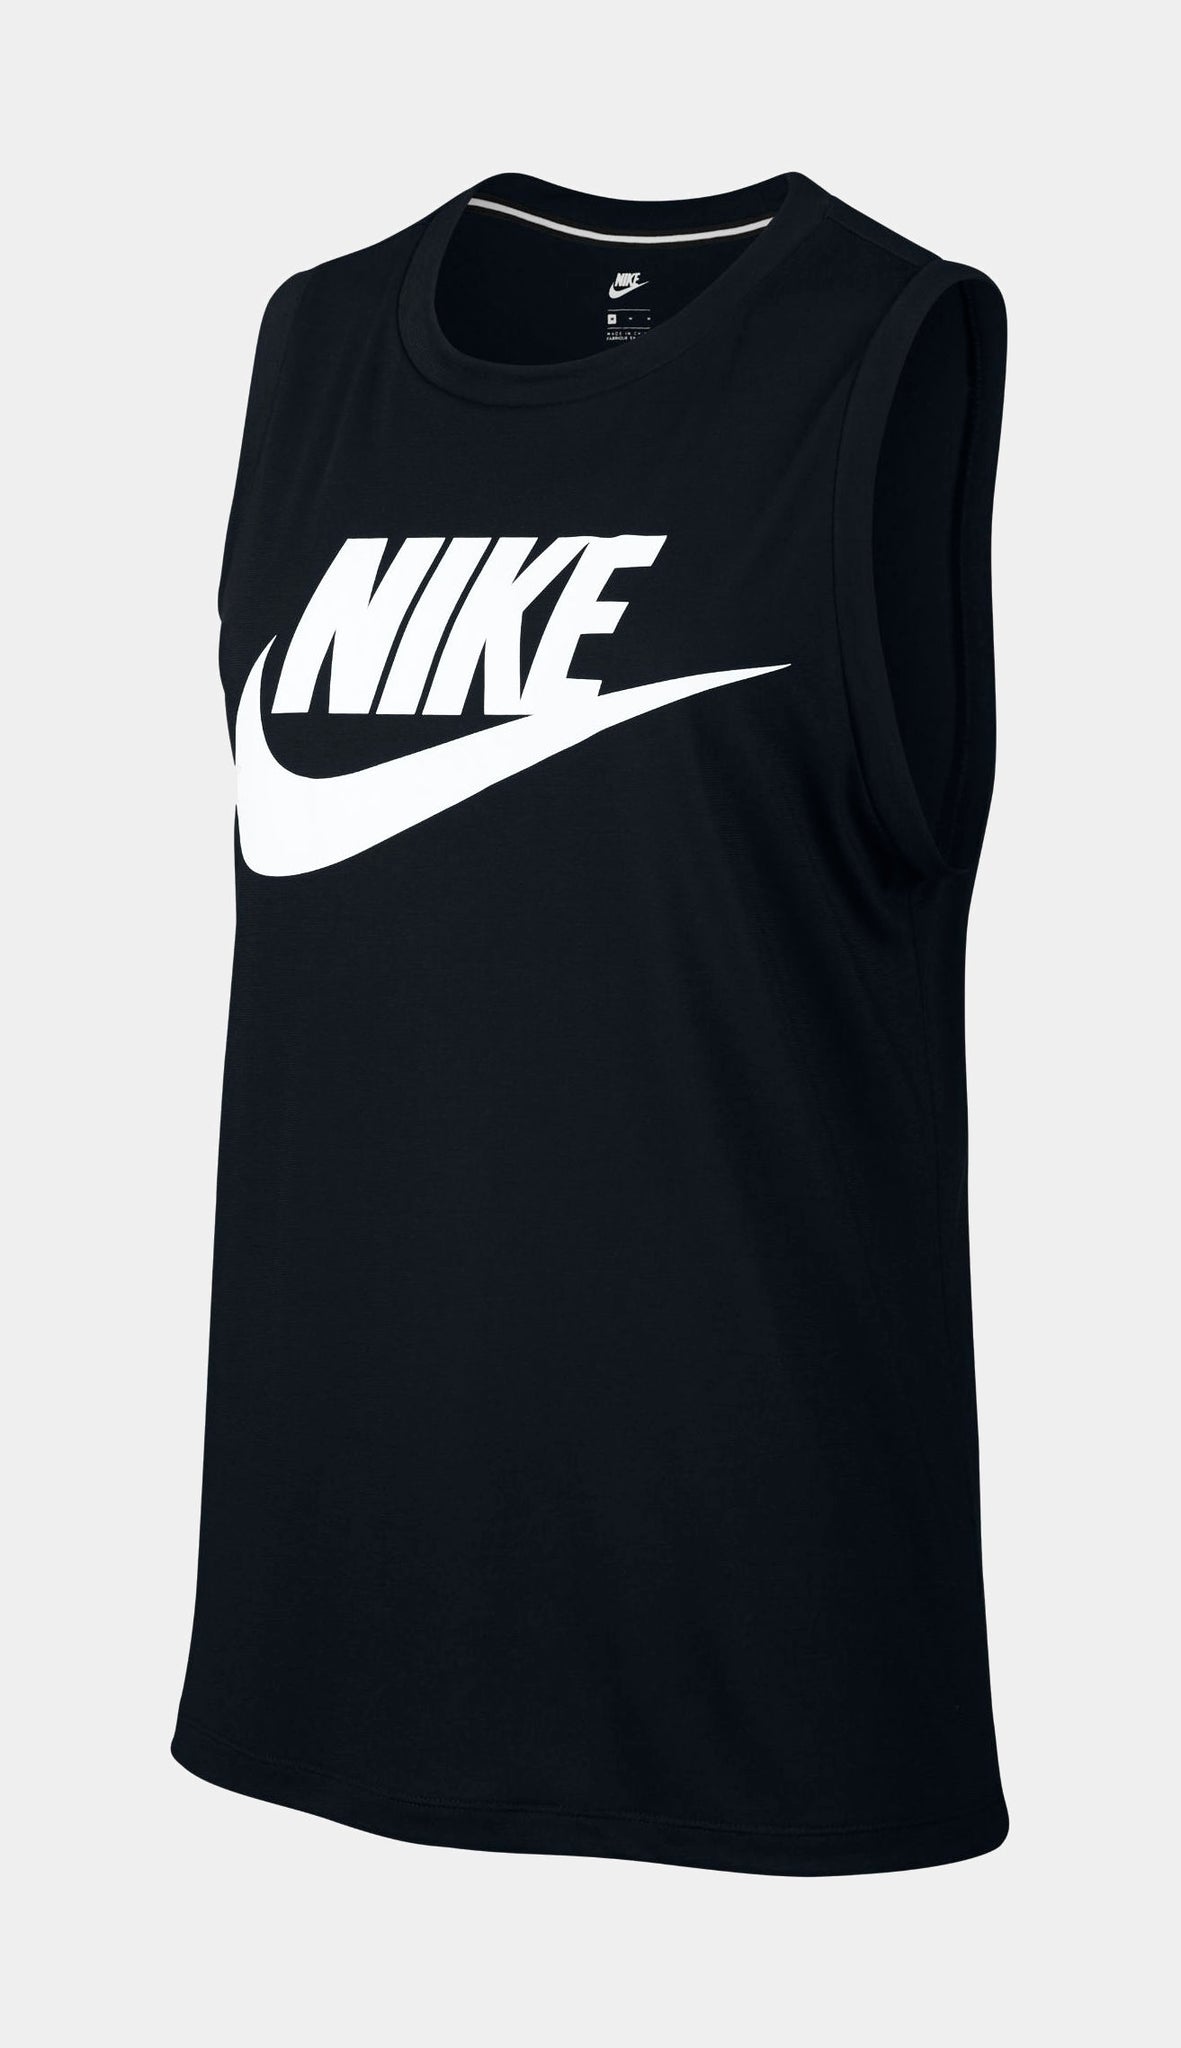 Essential Muscle Tank